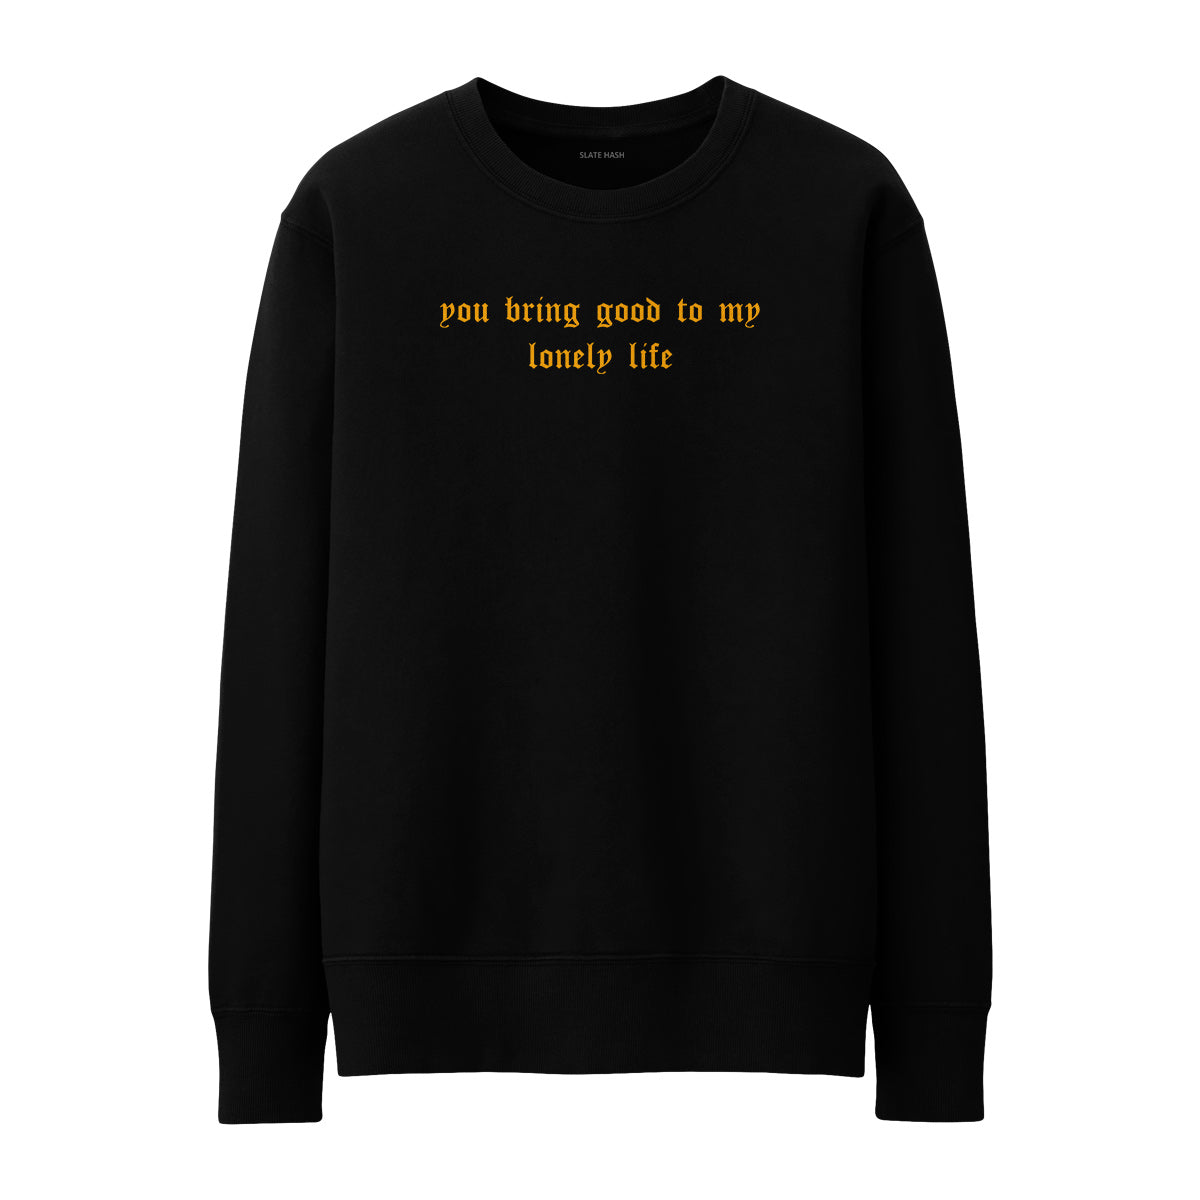 You bring good to my lonely life Sweatshirt